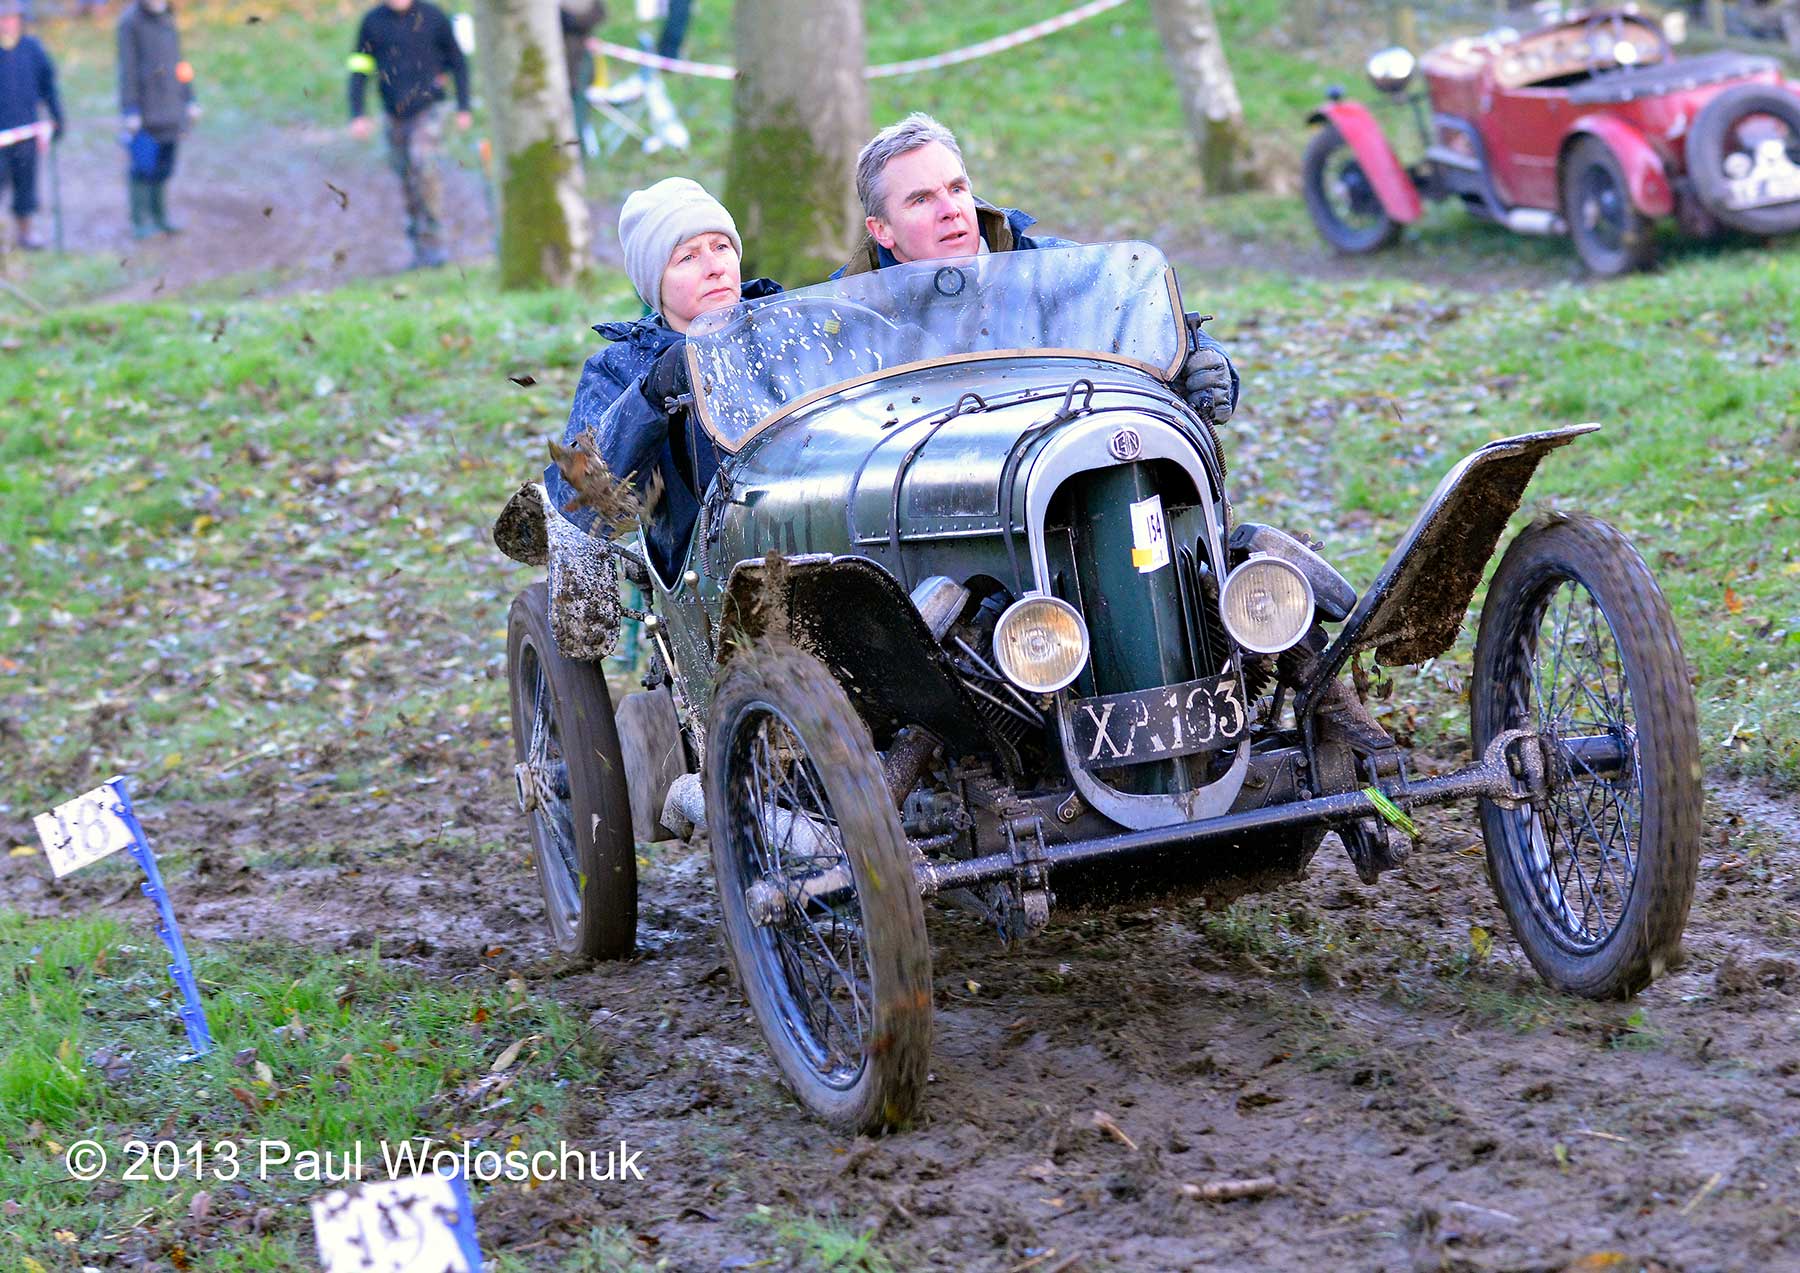 VSCC return to the Cotswolds for the 2014 Trials Season Finale this weekend cover